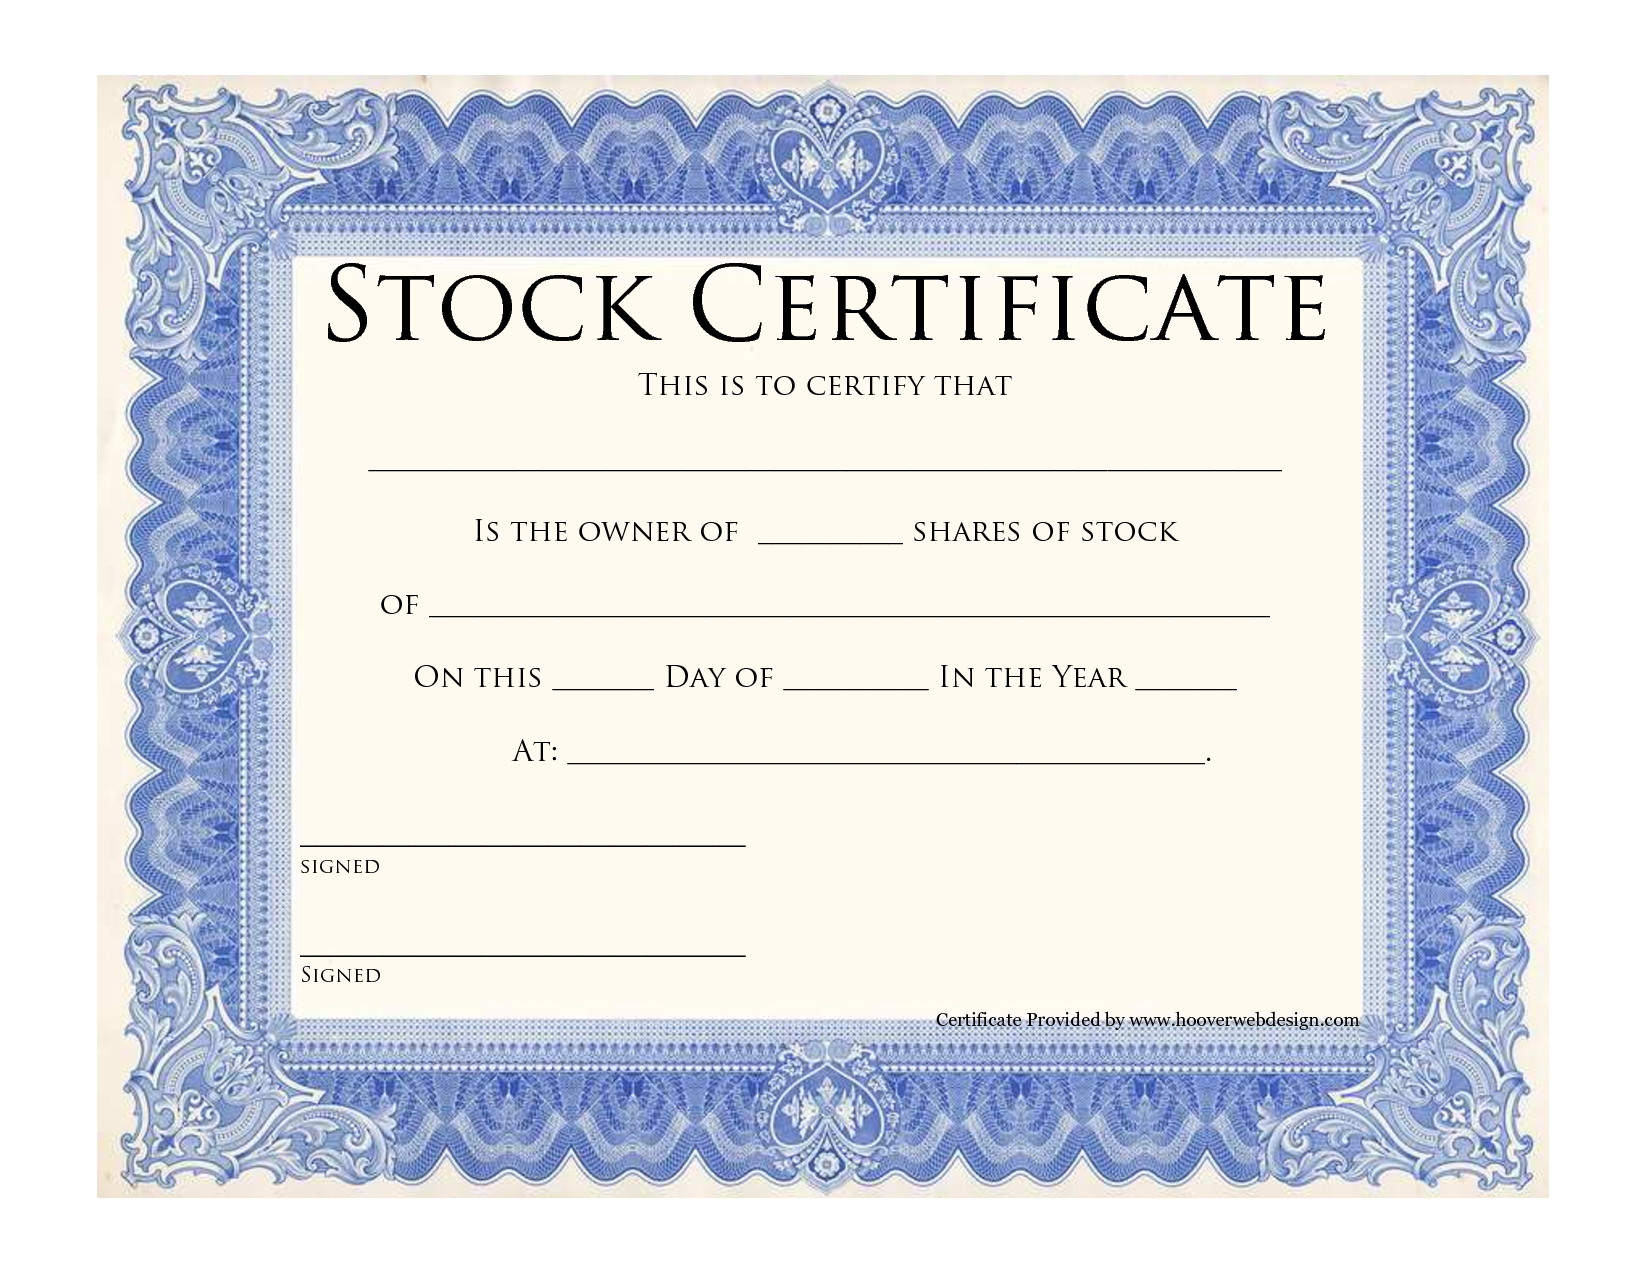 Certificate Template PNG - 6639